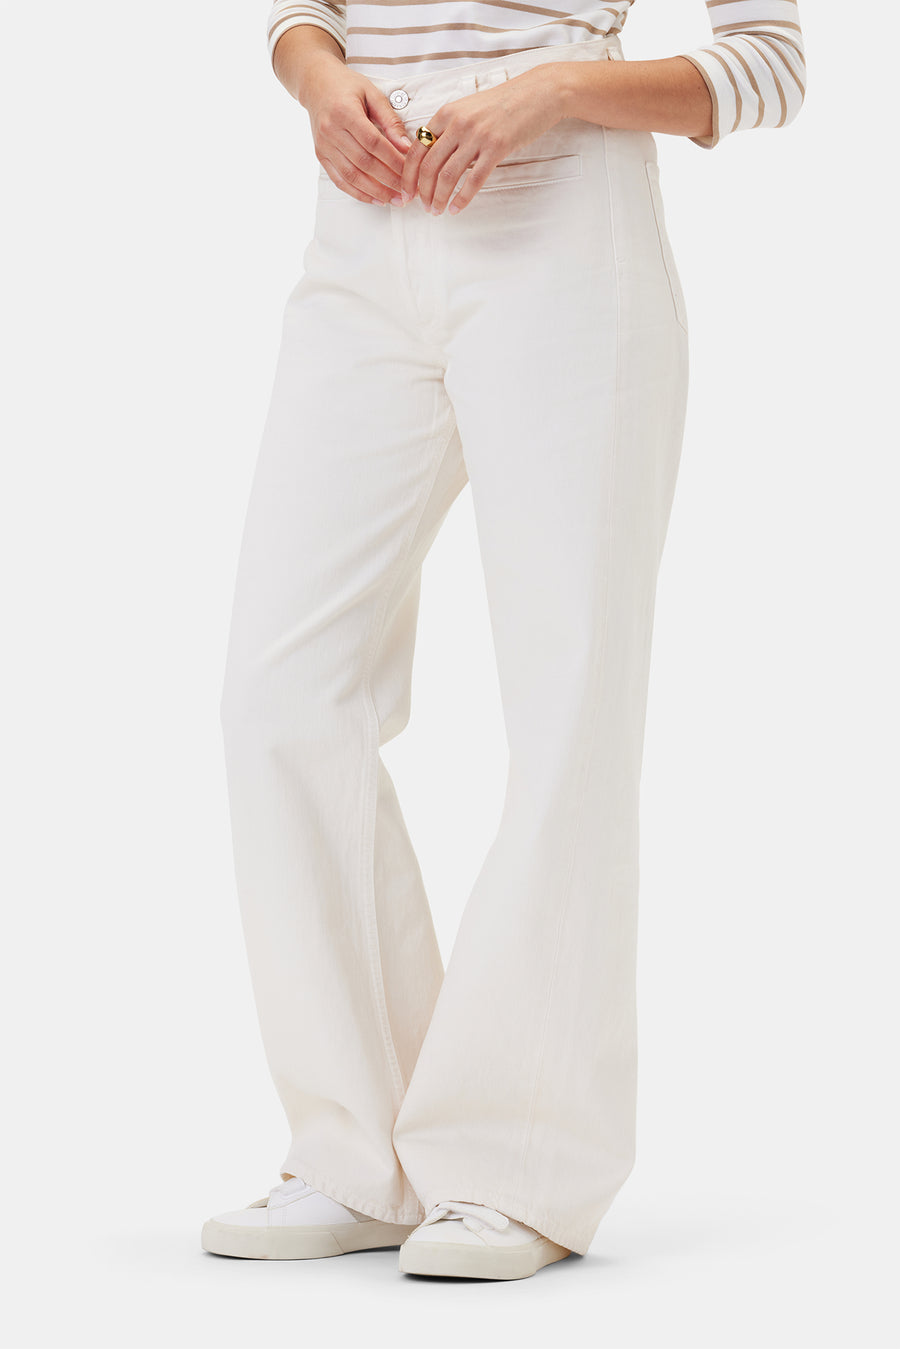 Citizens of Humanity Gaucho Trouser - Marzipan